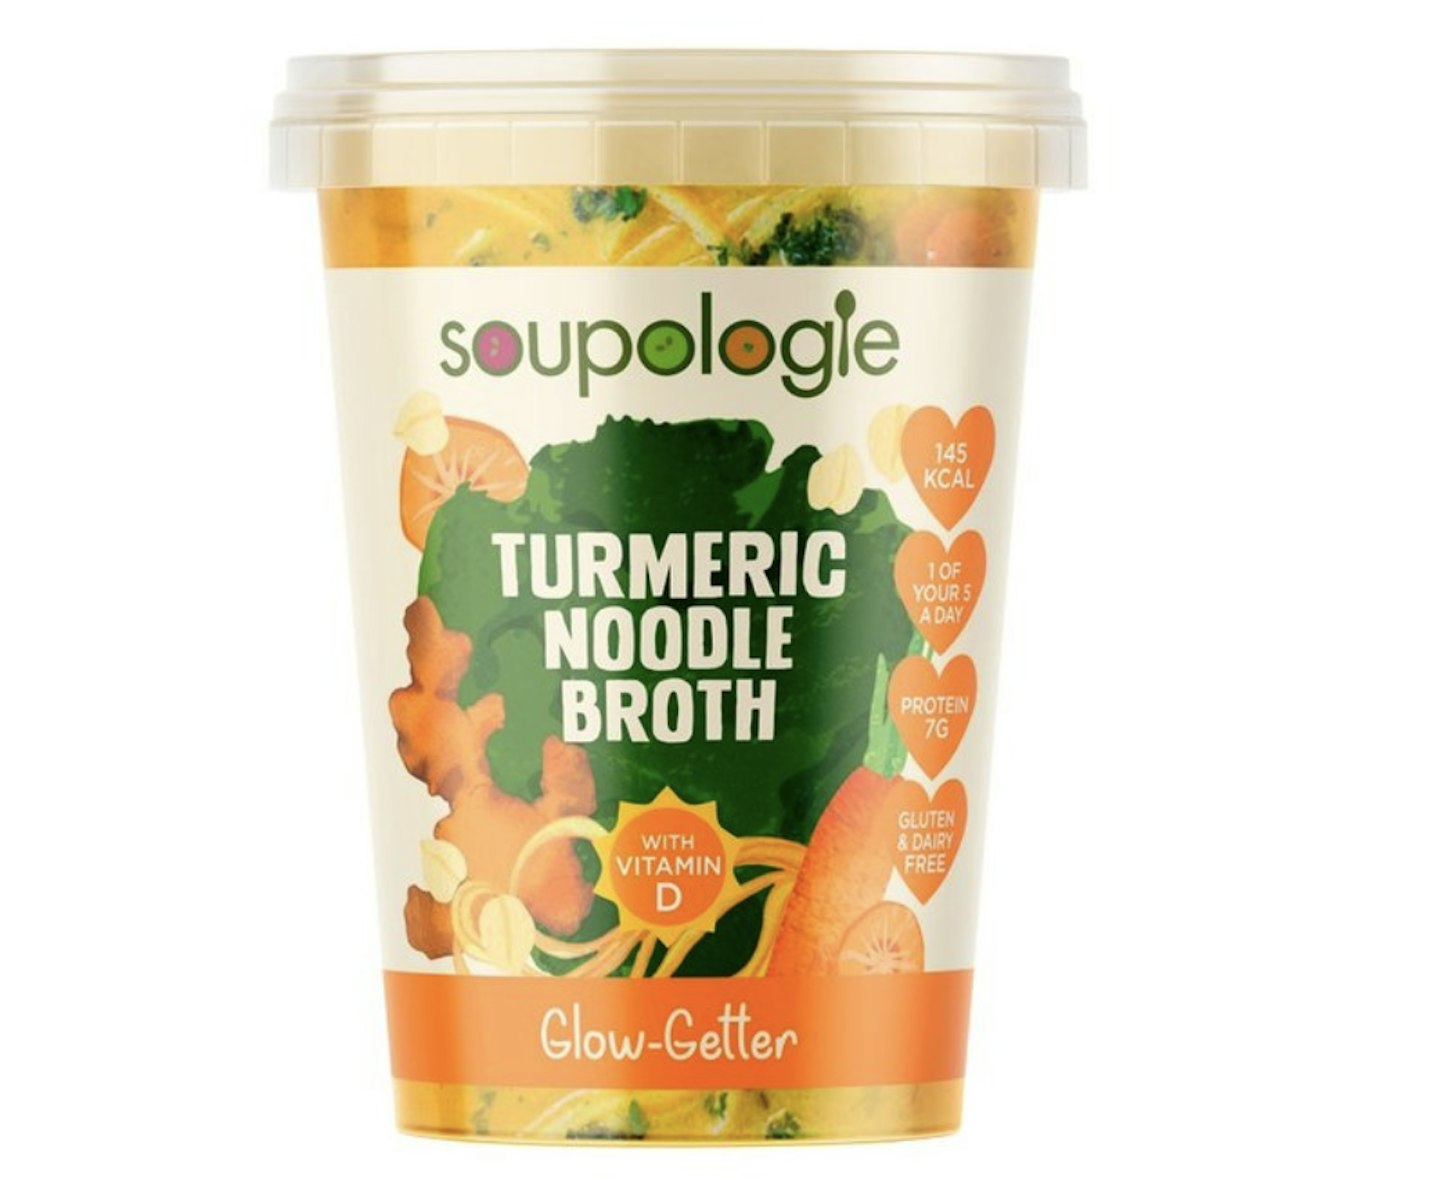 Soupologie Turmeric Noodle Broth with Vitamin D